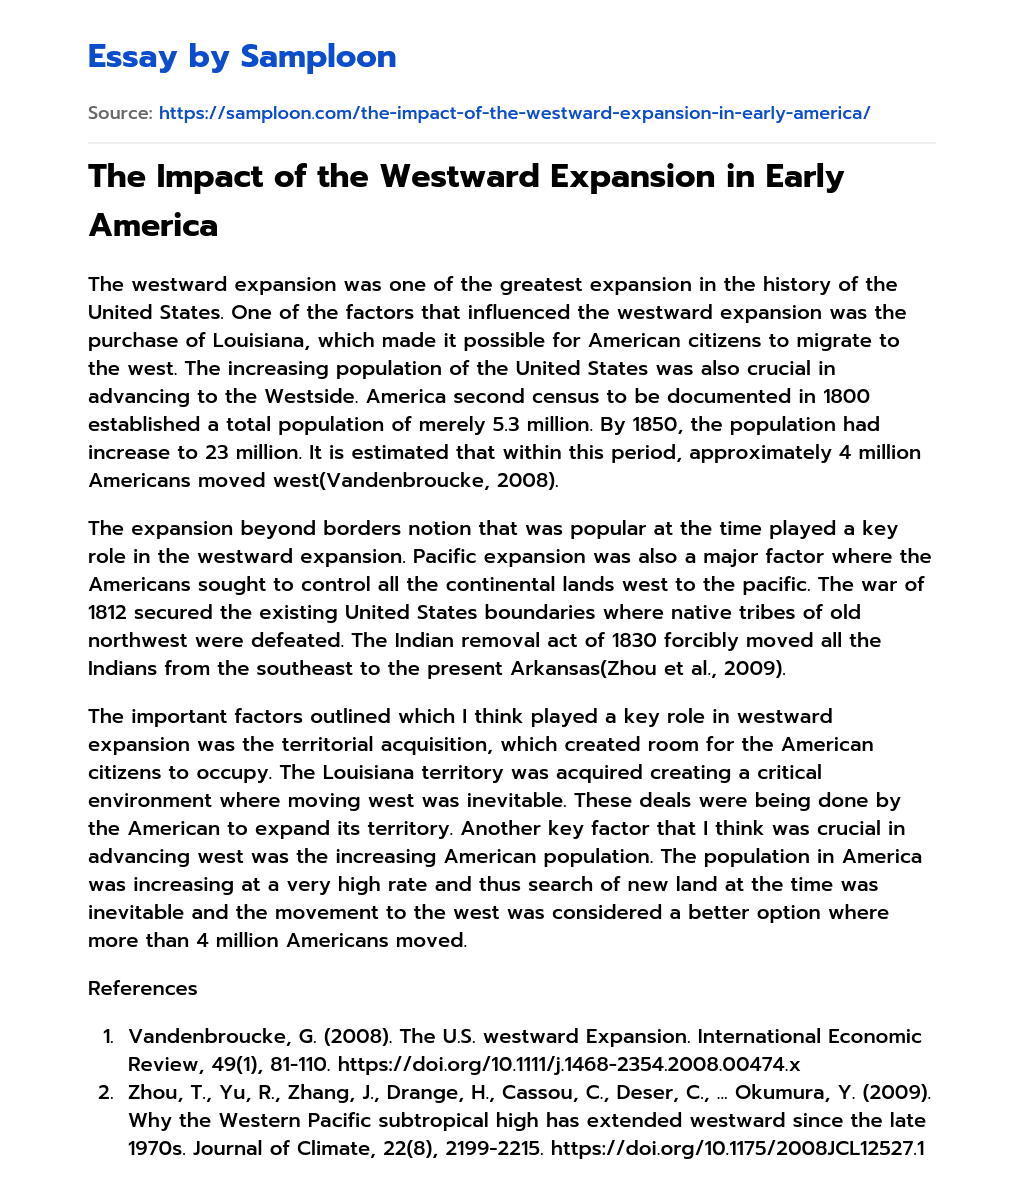 The Impact of the Westward Expansion in Early America essay